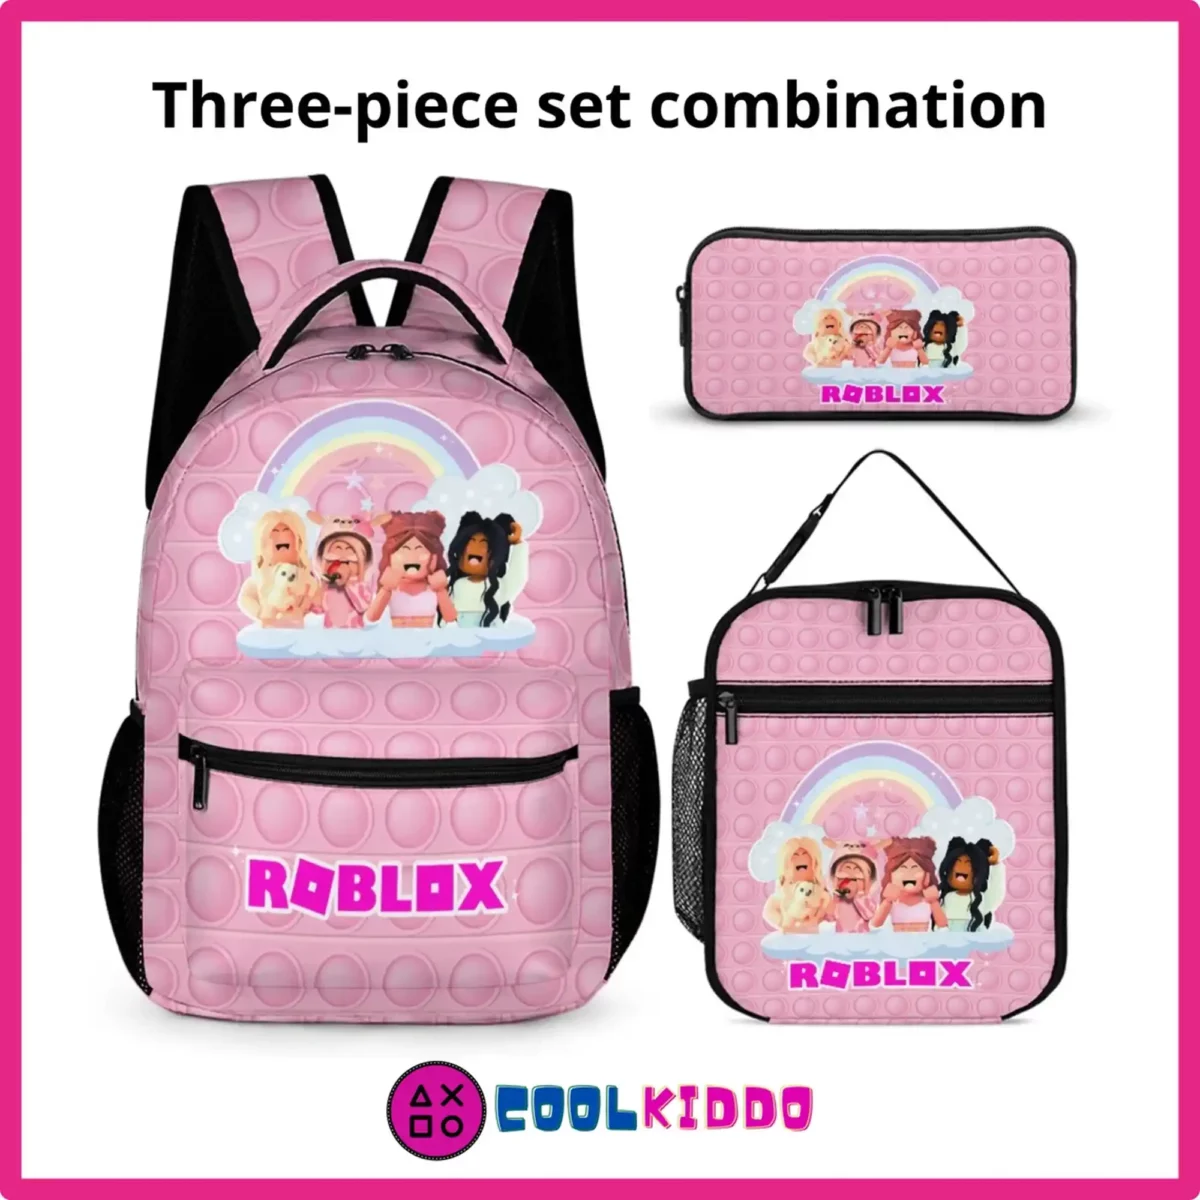 Personalized Roblox Pink Backpack for Girls – Three-Piece Set: Backpack, Lunch Bag, and Pencil Case Cool Kiddo 10